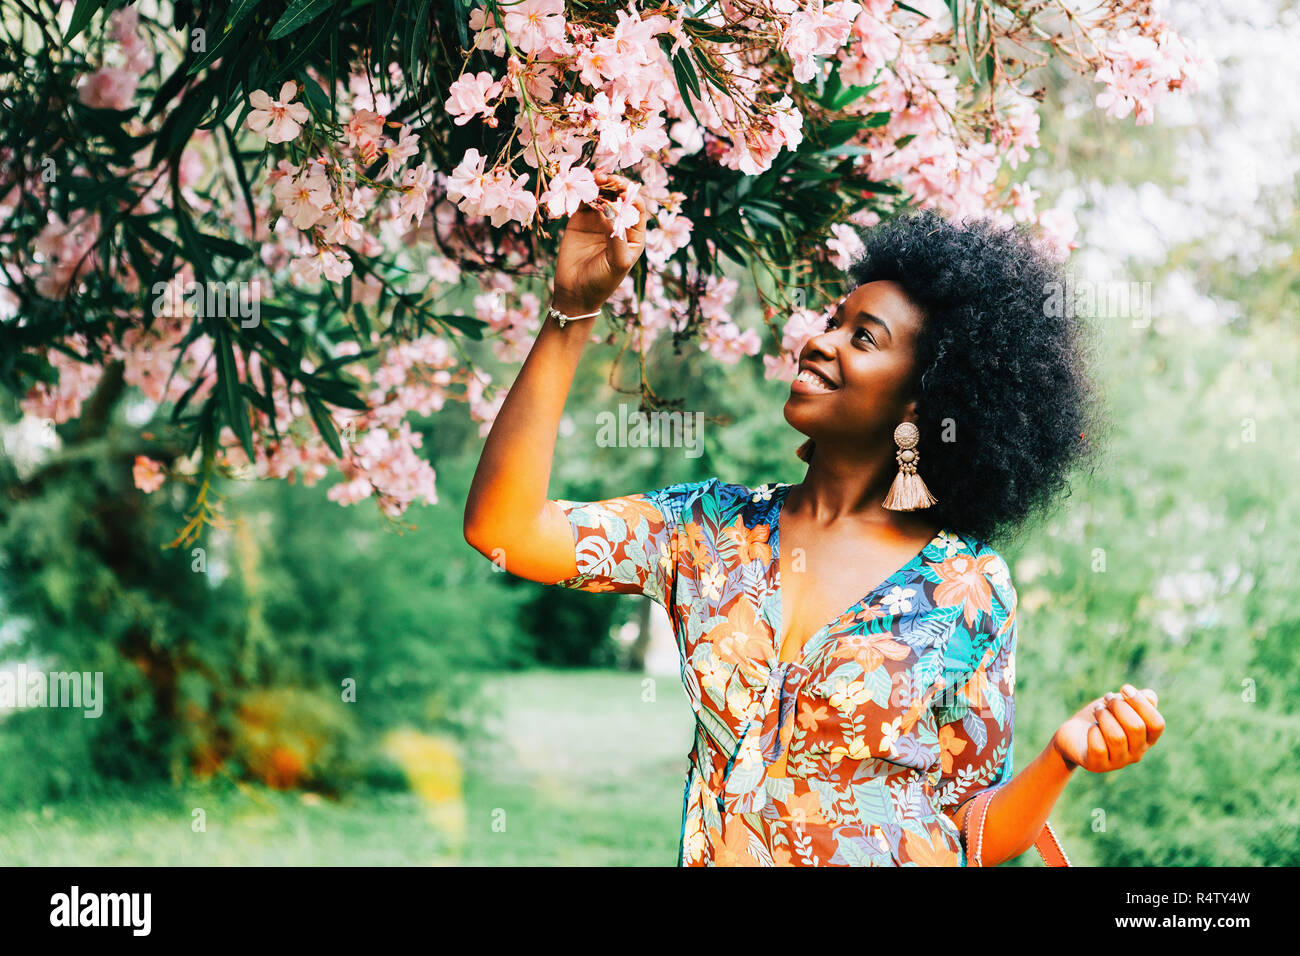 Young woman standing below tree with pink blossoms Stock Photo